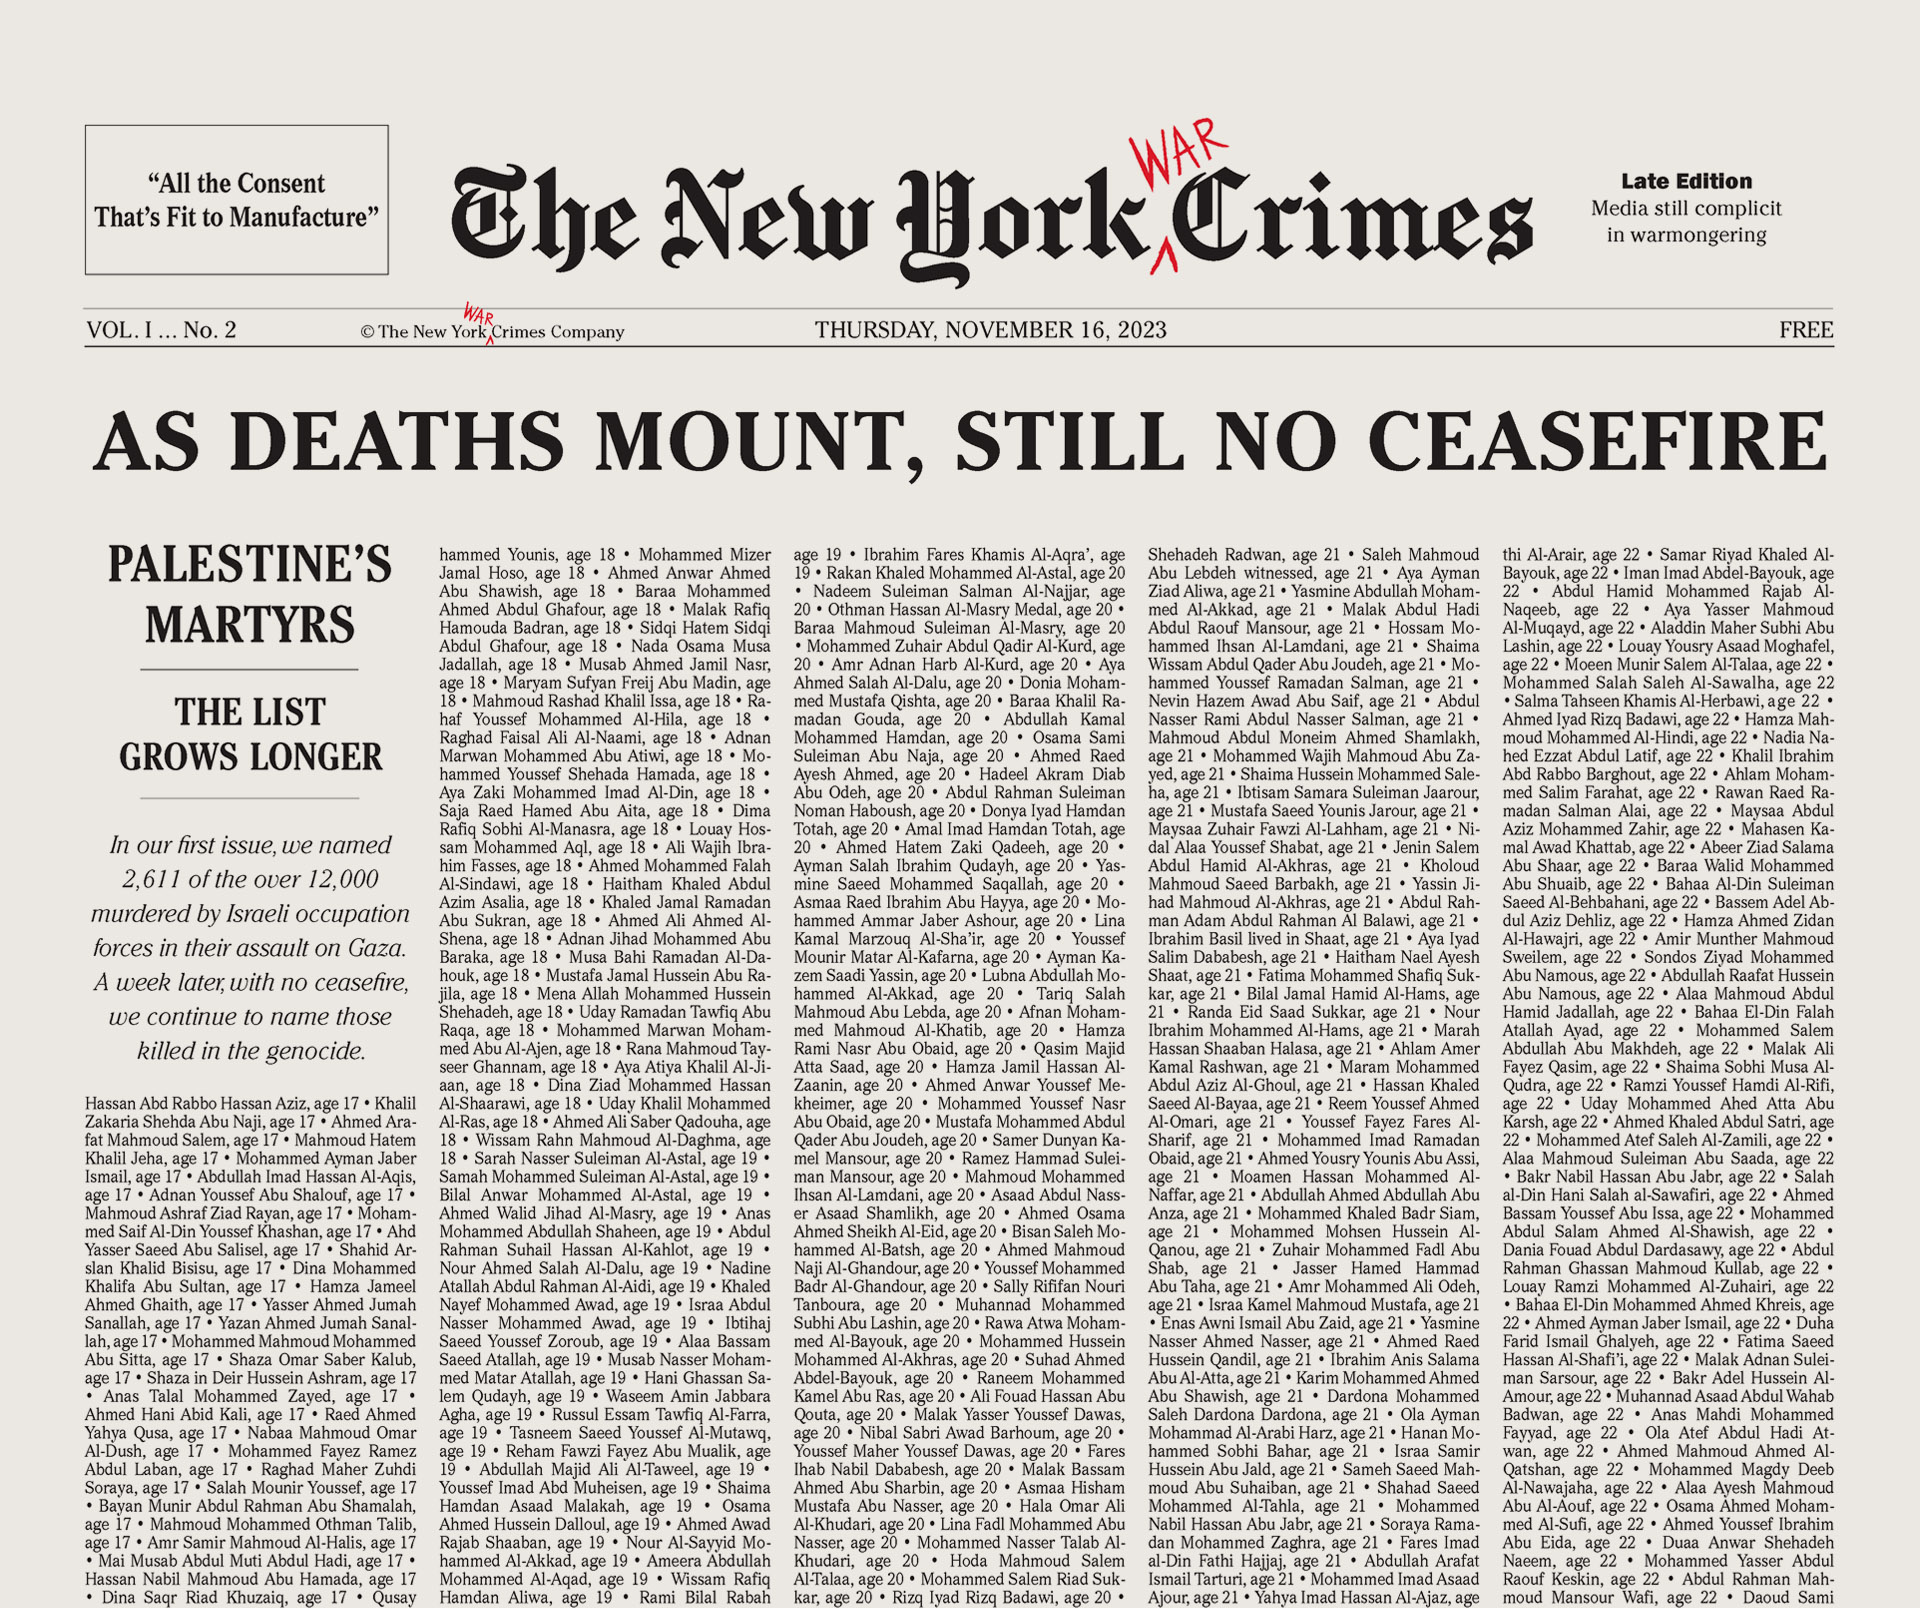 https://newyorkwarcrimes.com/media/pages/print-issue-vol-i-no-2-as-death-mounts-still-no-ceasefire/eb76c98027-1708981499/ny-crimes-02-cover.jpg